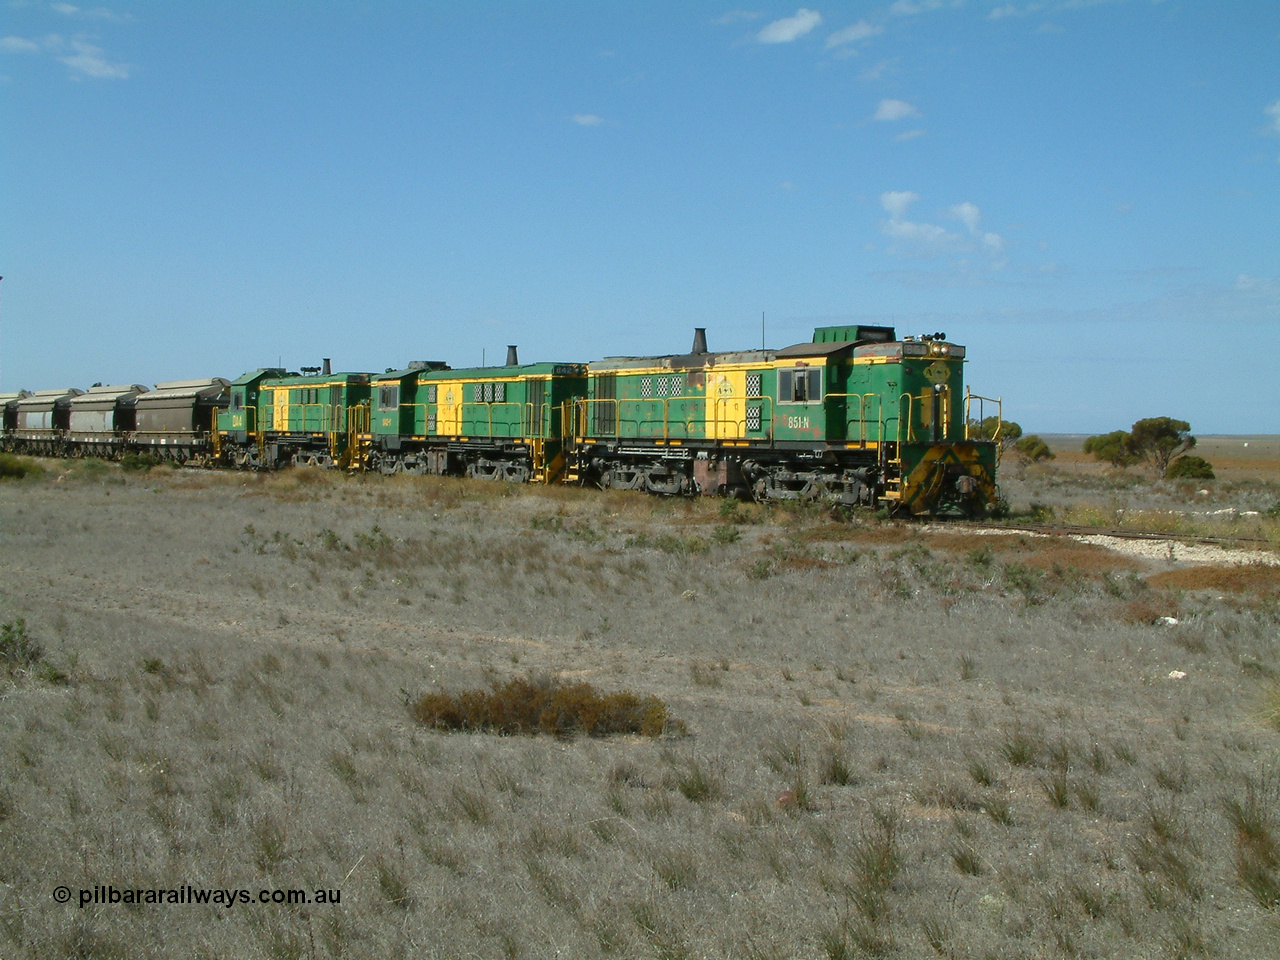 030409 140546
Wharminda, loaded grain train arrives behind 830 class unit 851 AE Goodwin ALCo model DL531 serial 84137, 851 has spent its entire operating career on the Eyre Peninsula, with fellow 830 class 842 serial 84140 and a rebuilt unit DA 4 as they stop to pick up loaded waggons.
Keywords: 830-class;851;84137;AE-Goodwin;ALCo;DL531;